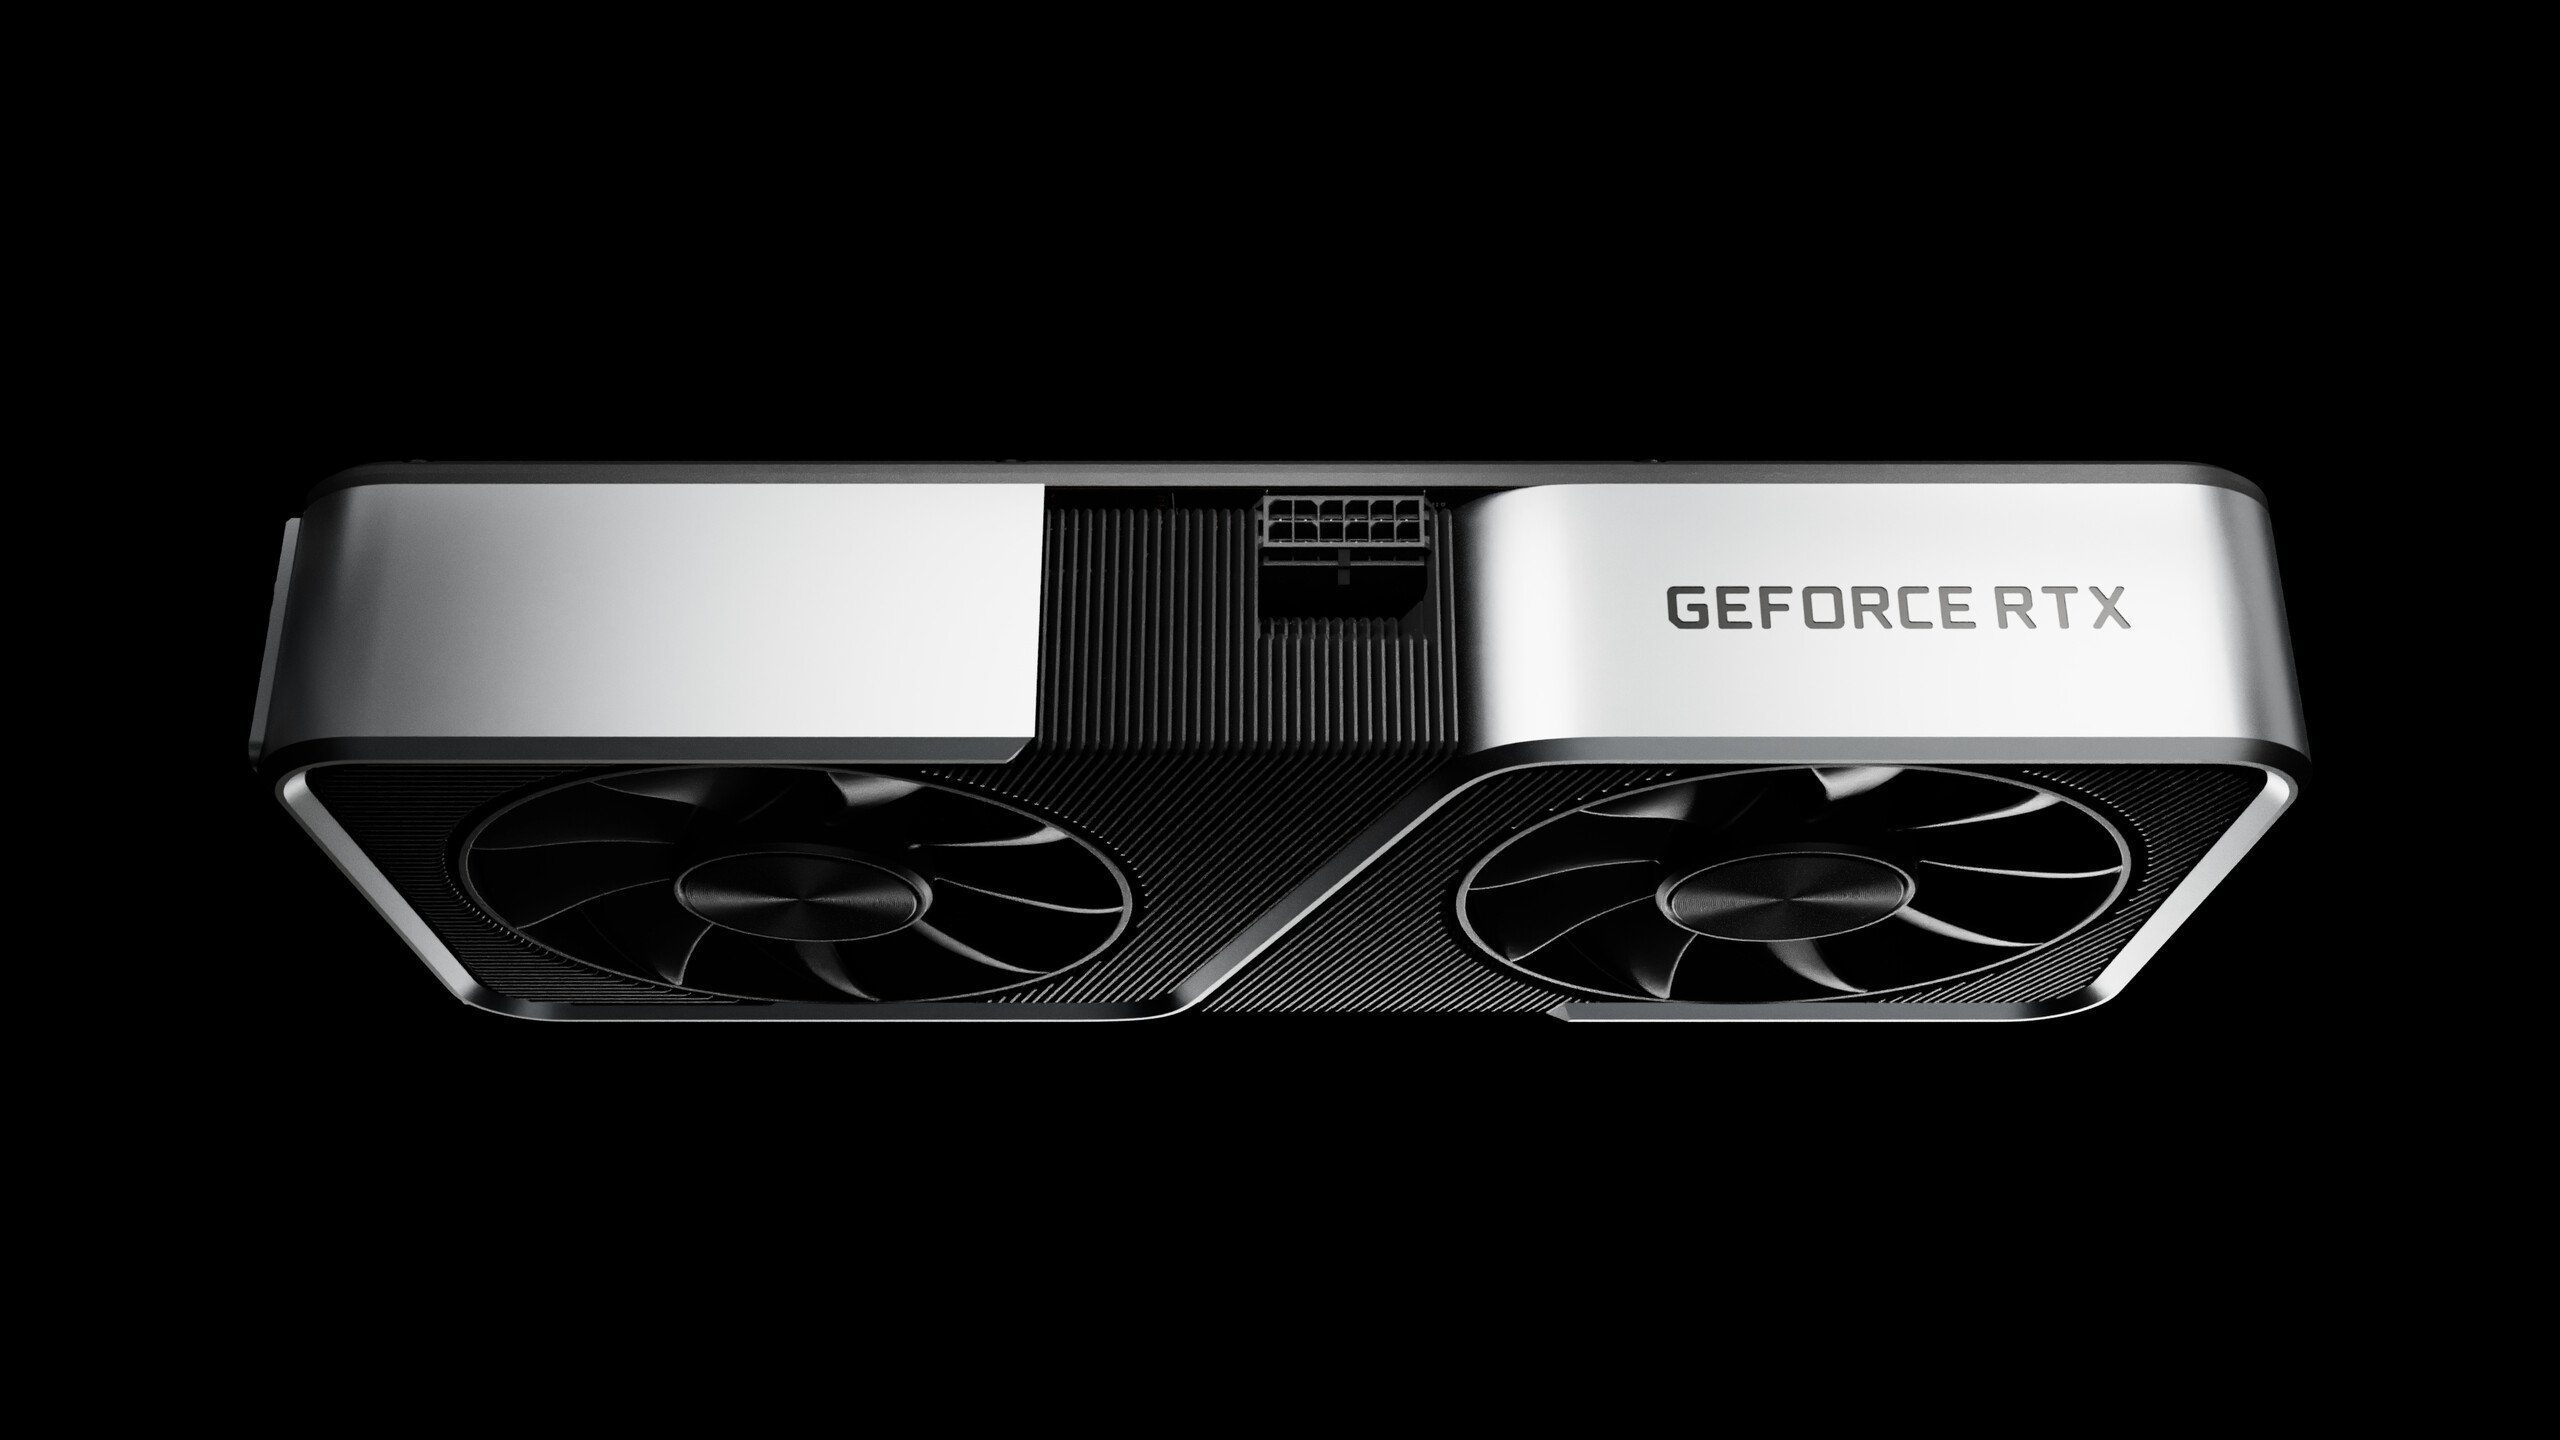 Nvidia GeForce RTX 3050 and RTX 3050 Ti desktops variants could hit shelves sometime in Q 2022.net News